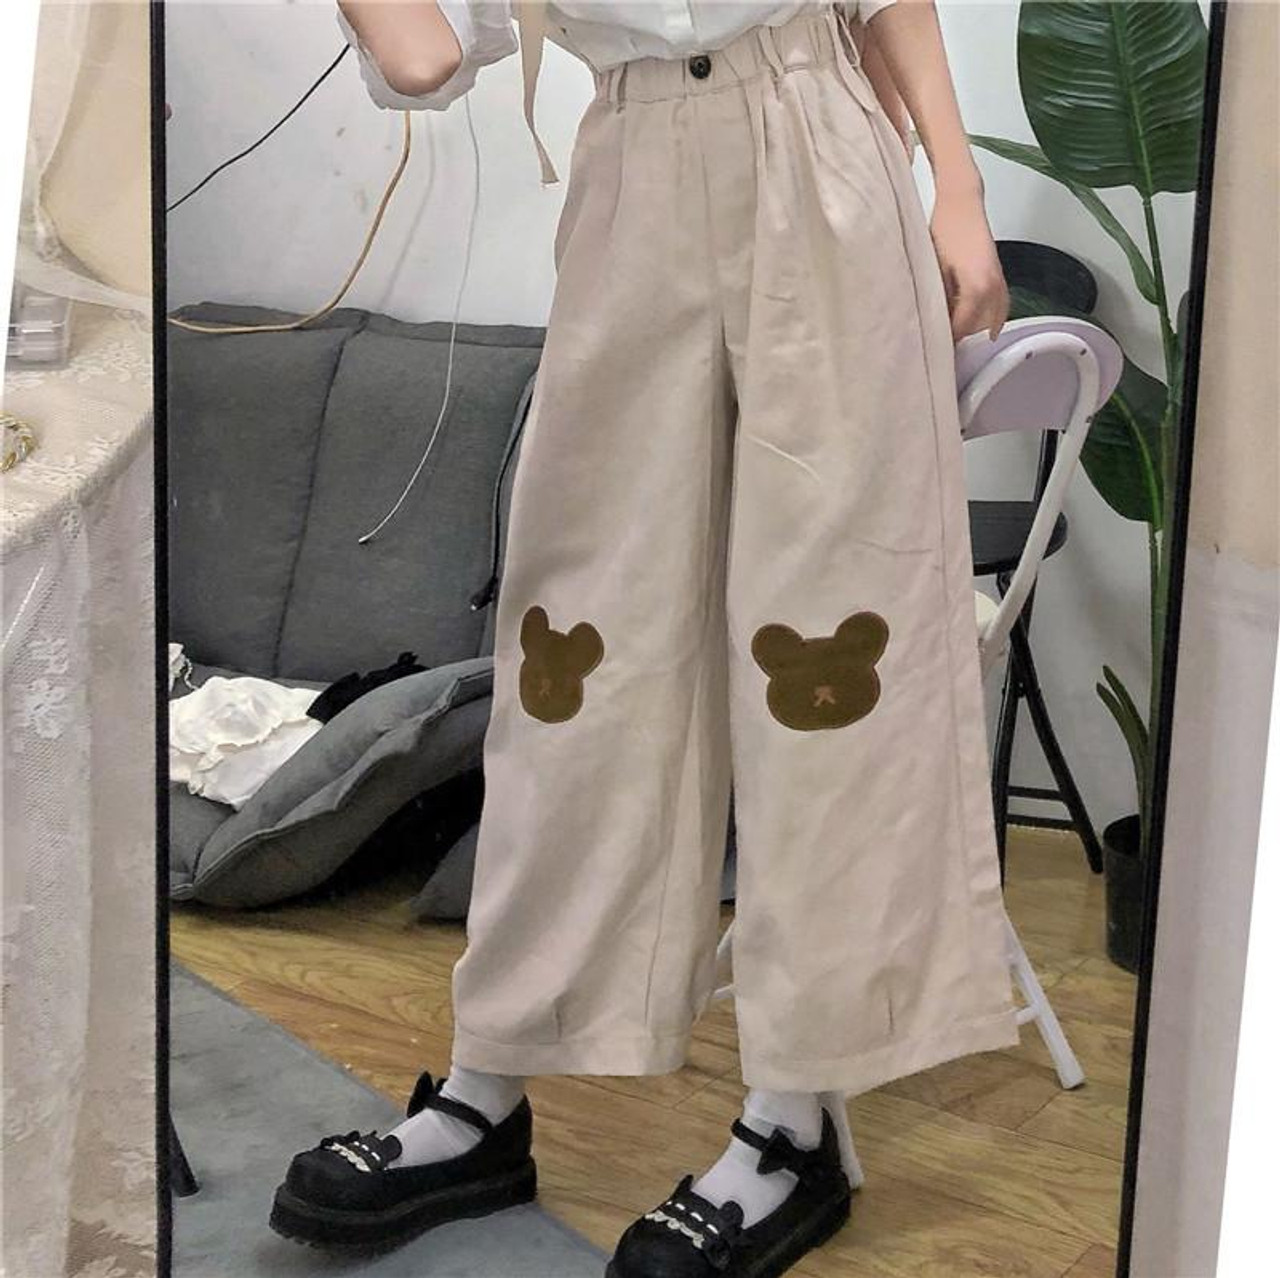 https://cdn11.bigcommerce.com/s-c7qlm8a06j/images/stencil/1280x1280/products/1672/13833/kawaii-girl-bear-embroidery-pants-cosmiquestudio-aesthetic-outfits__65520.1643997039.jpg?c=1?imbypass=on